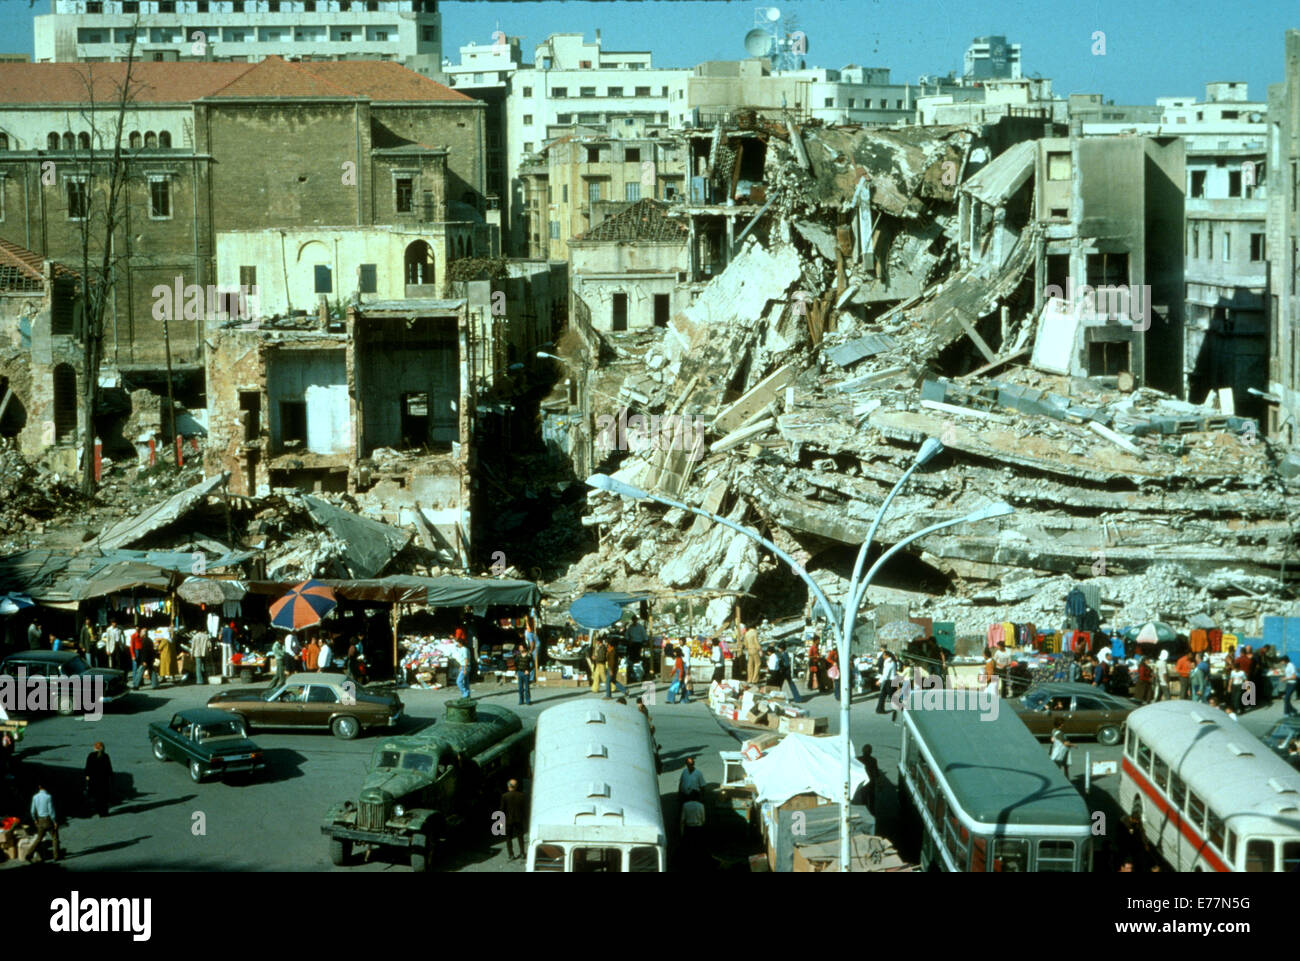 Place des Martyrs in Beirut showing gross damage during the civil war in Lebanon, 1975 Stock Photo